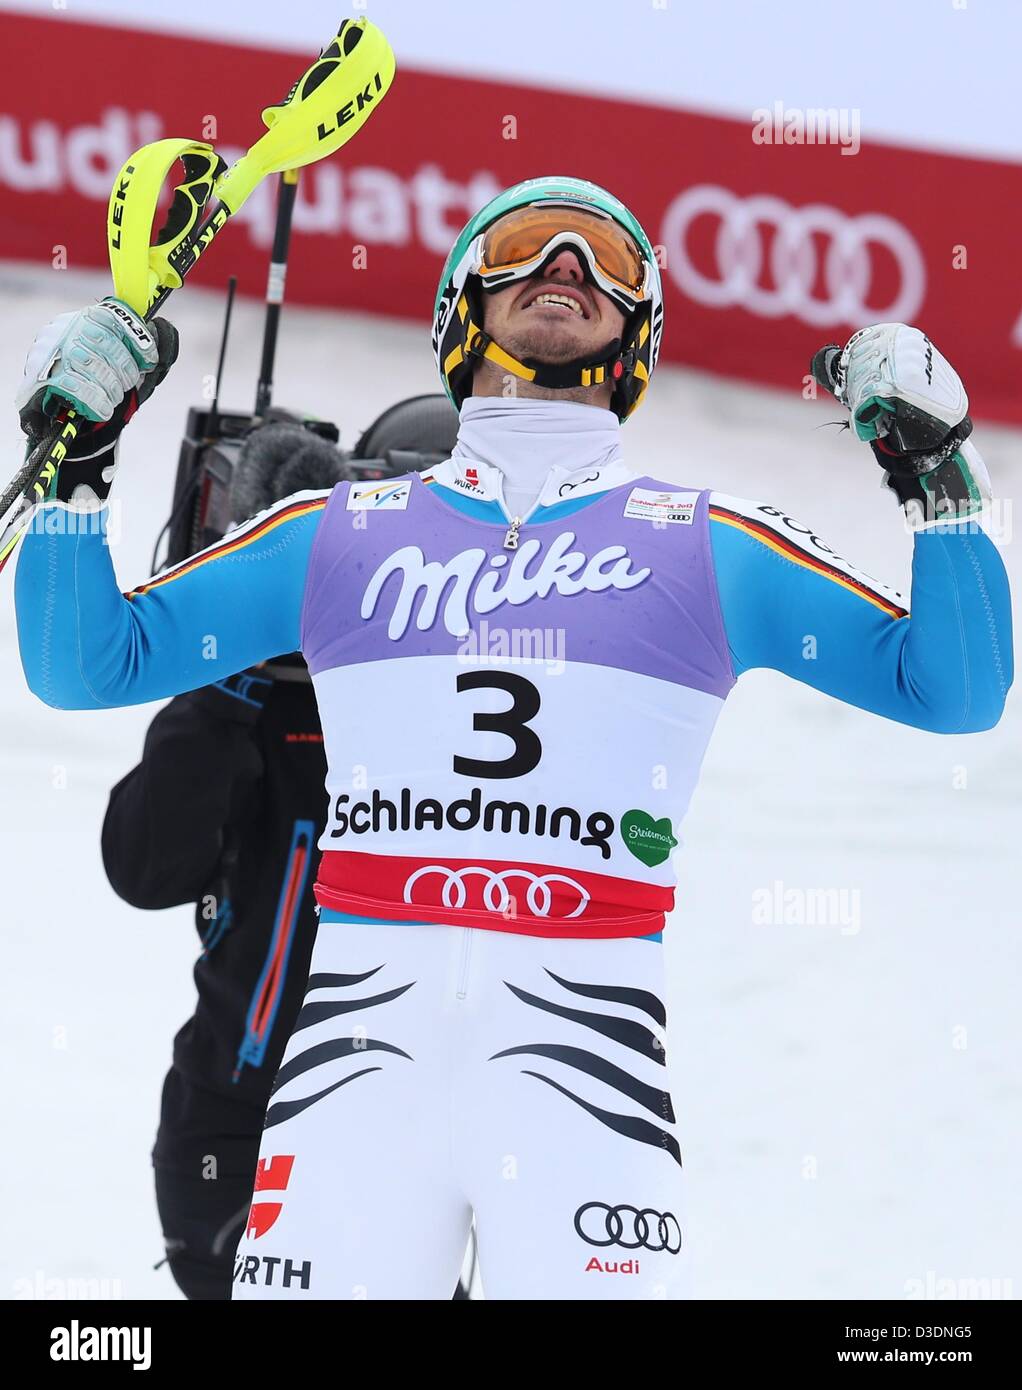 Felix Neureuther of Germany celebrates during the second run of the men's slalom at the Alpine Skiing World Championships in Schladming, Austria, 17 February 2013. Photo: Karl-Josef Hildenbrand/dpa Stock Photo